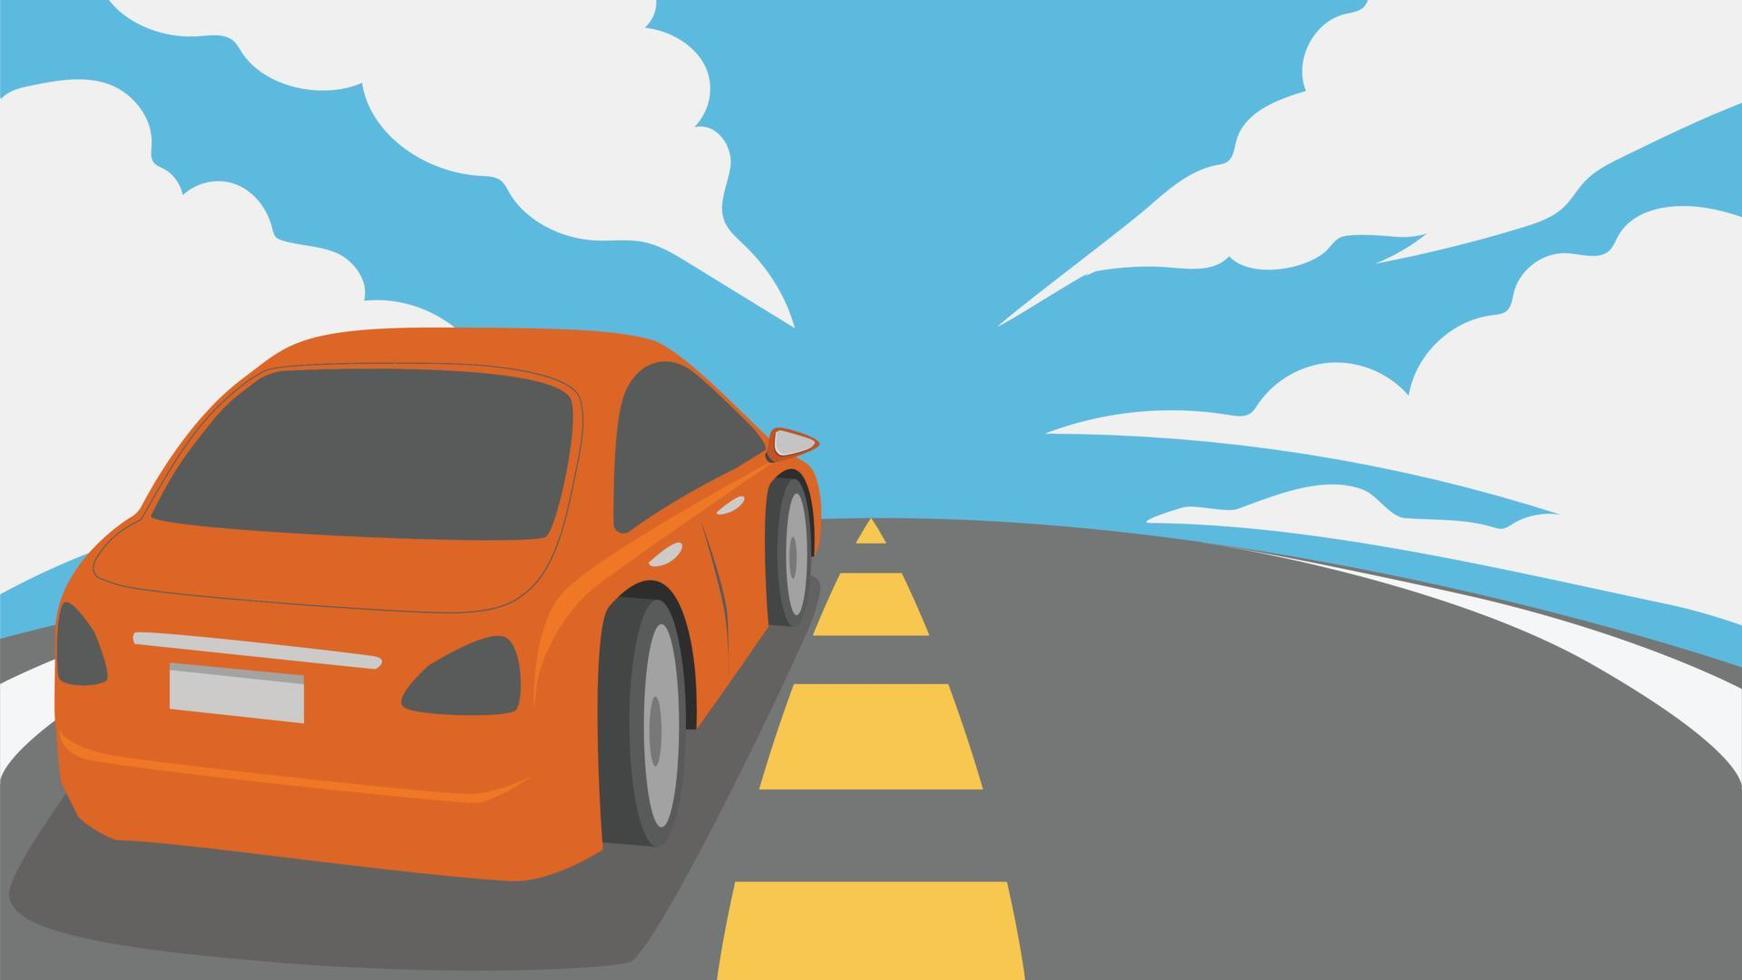 Vector or illustration of Driving of an orange car towards the front on an asphalt road. Motion of road under blue sky and white clouds.